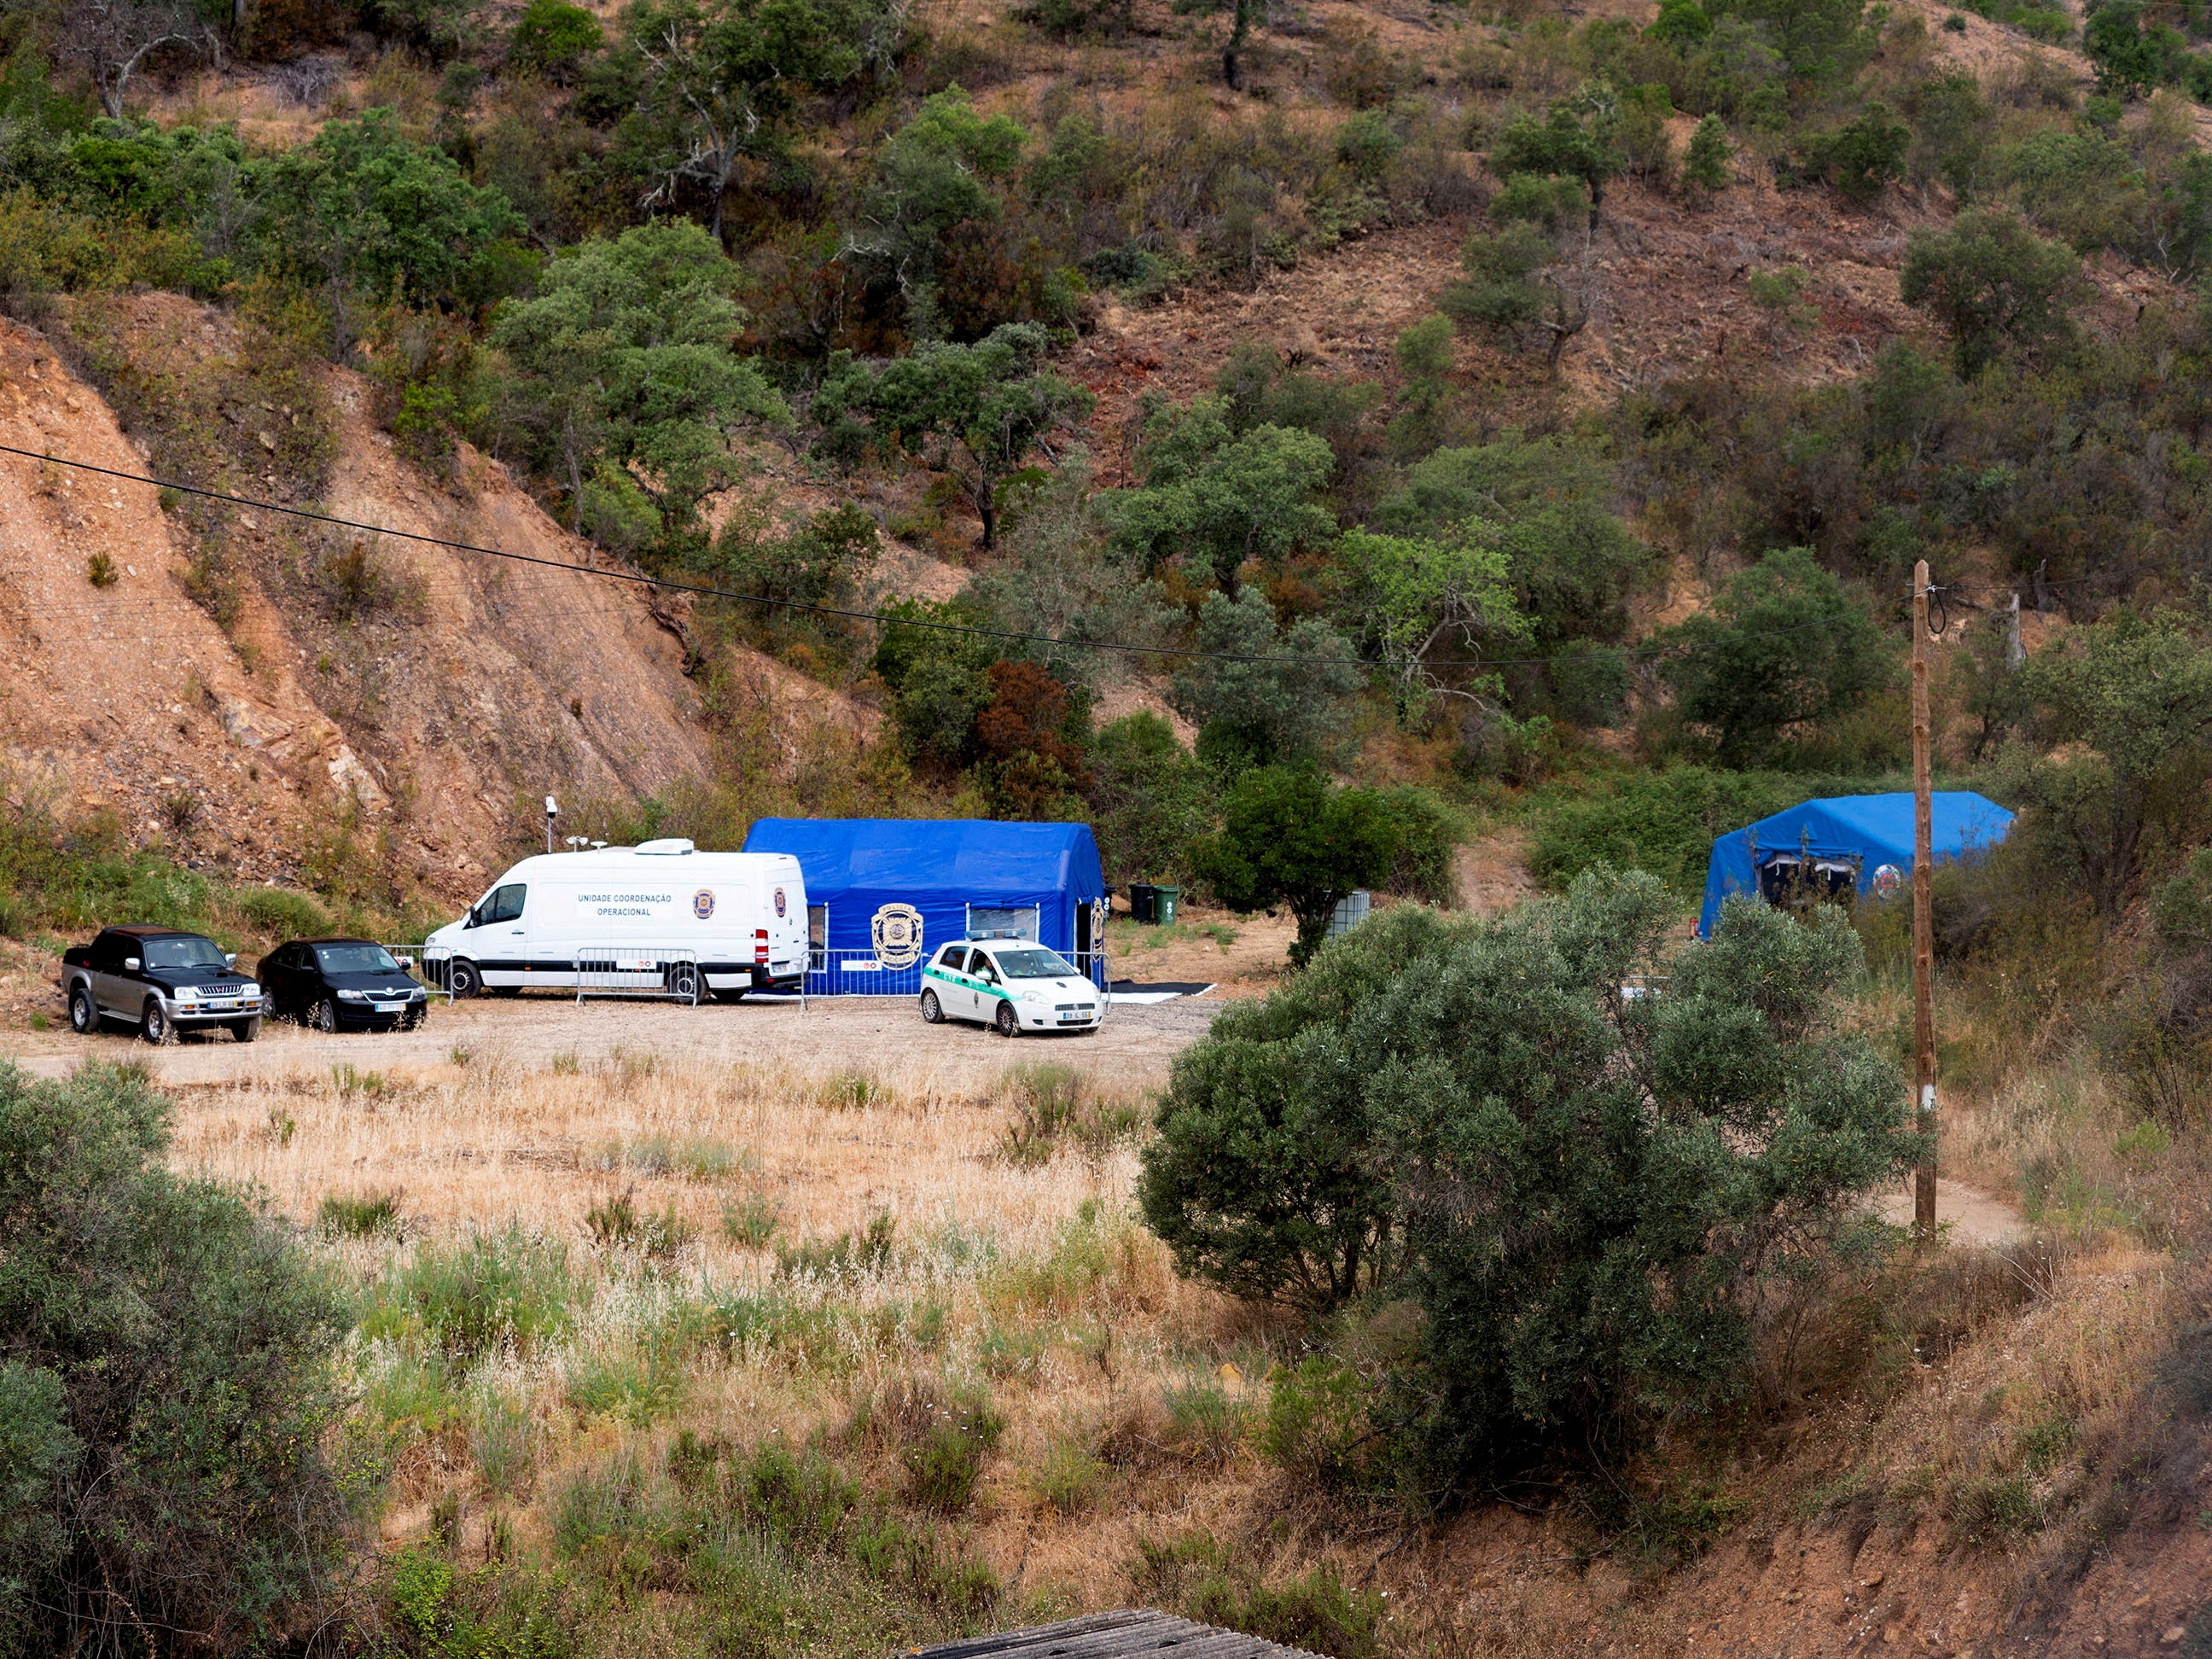 <p>Vehicles and tents of Portugal’s investigative Judicial Police are seen at the site of a remote reservoir where a new search for the body of Madeleine McCann is set to take place, in Silves</p><p>” height=”1944″ width=”2592″ layout=”responsive” class=”i-amphtml-layout-responsive i-amphtml-layout-size-defined” i-amphtml-layout=”responsive”><i-amphtml-sizer slot=